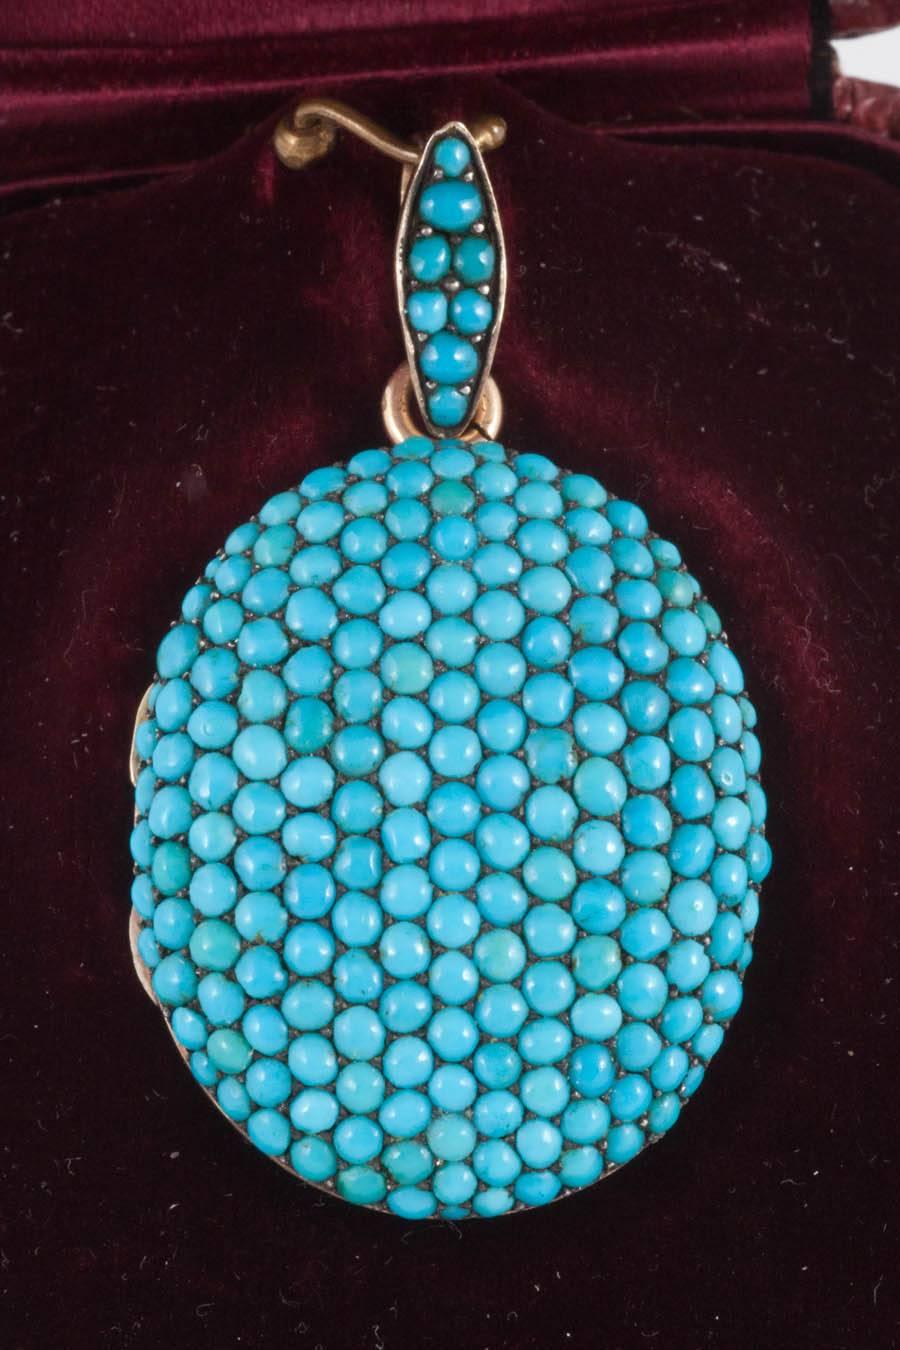 This 18ct Gold locket is set with natural Persian Turquoise in Pave setting. Has an engraved gold back